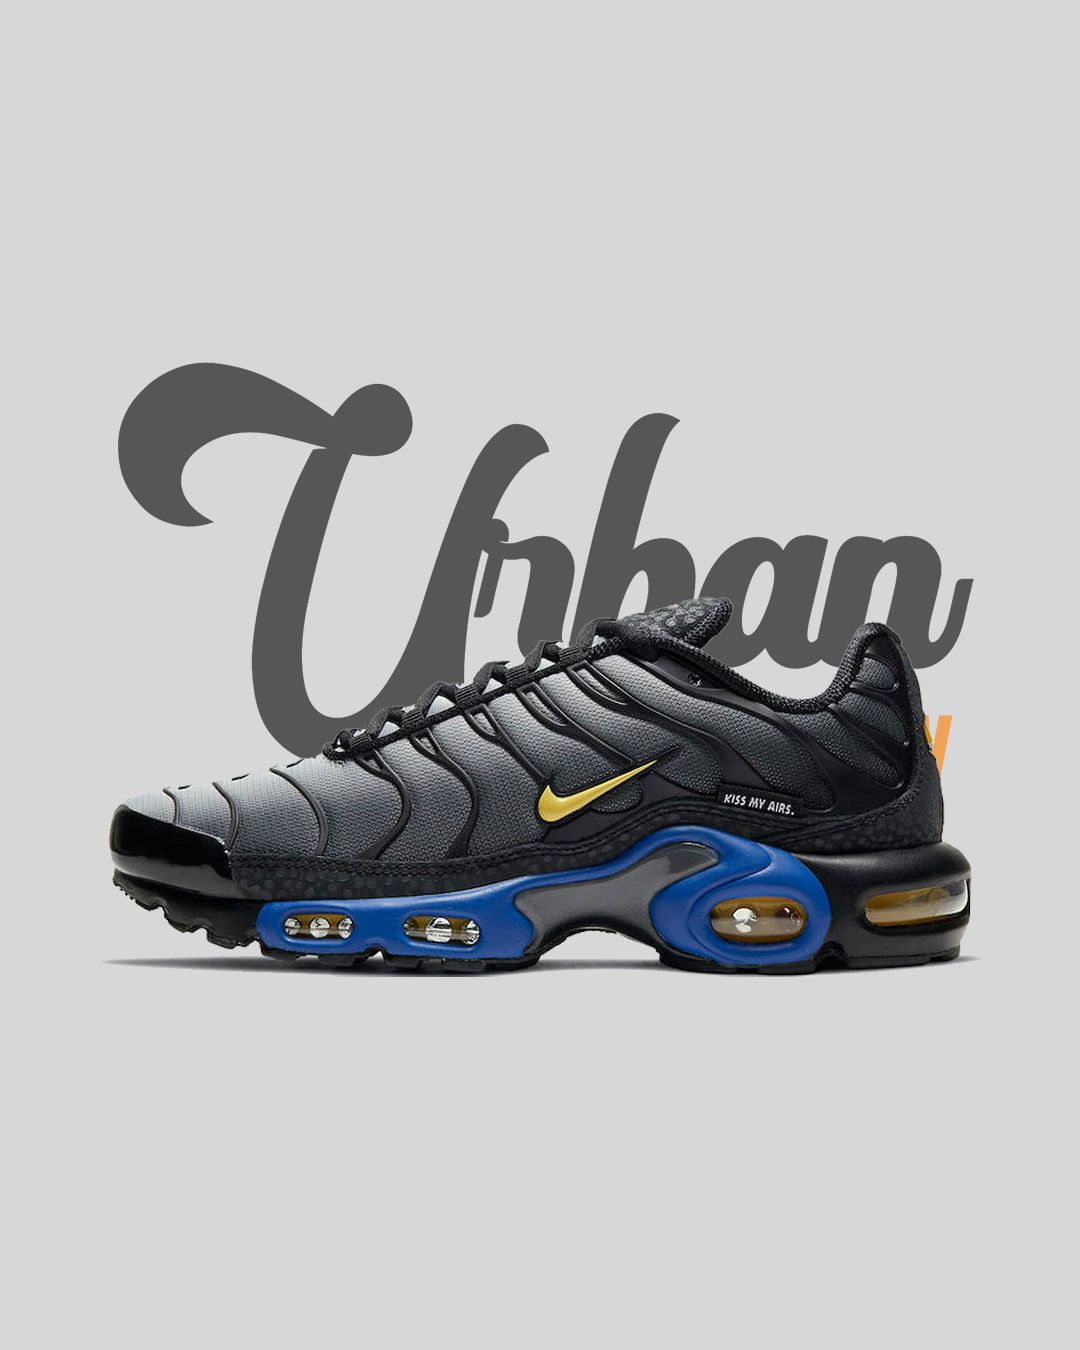 Air Max Plus My Airs” – Collection